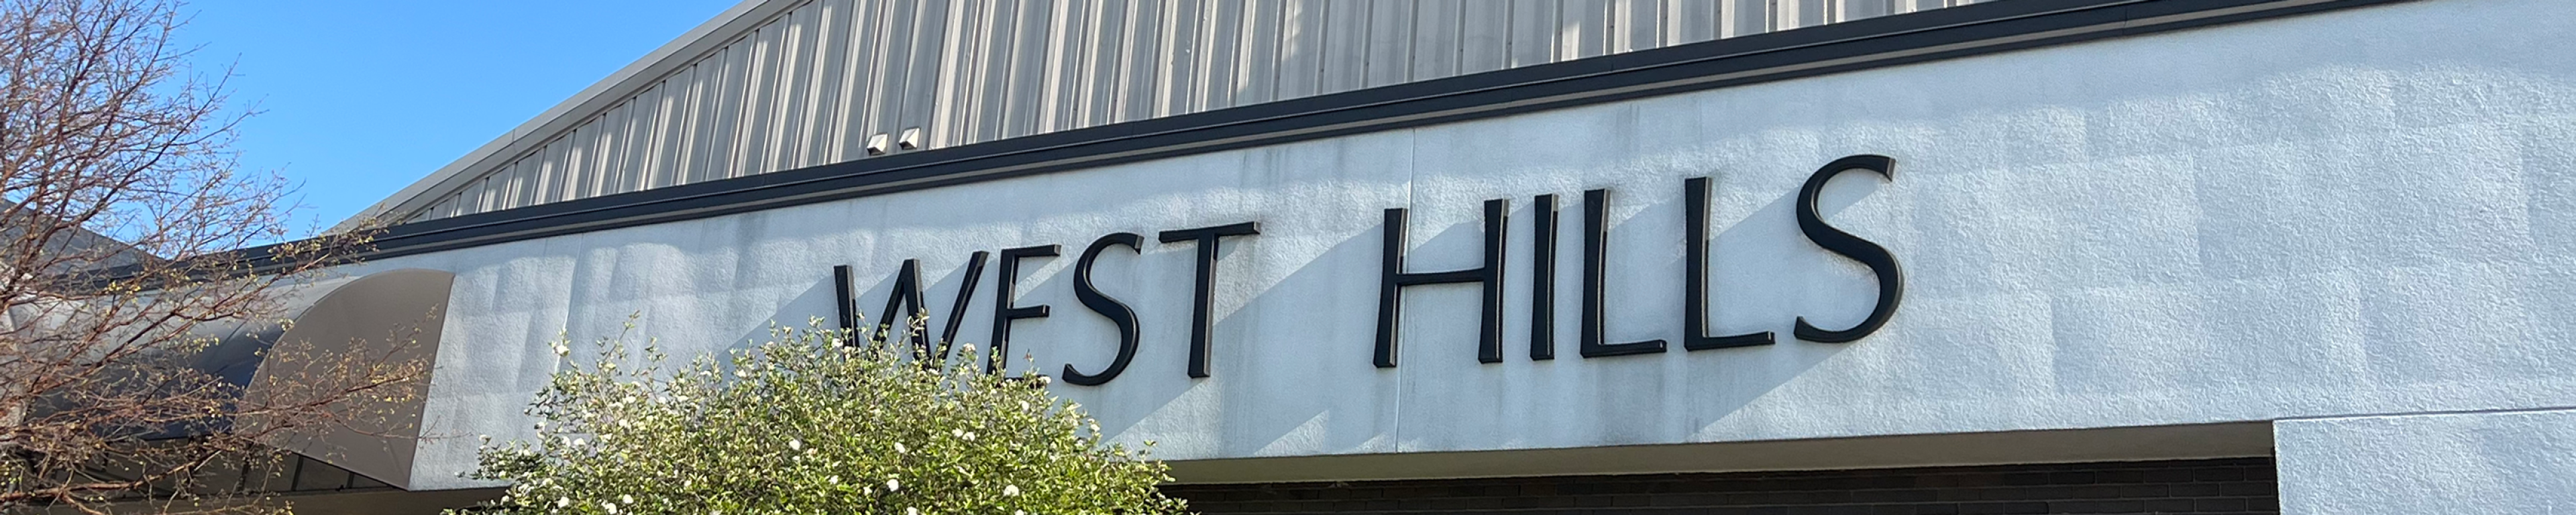 Close up of the West Hills sign on the building.